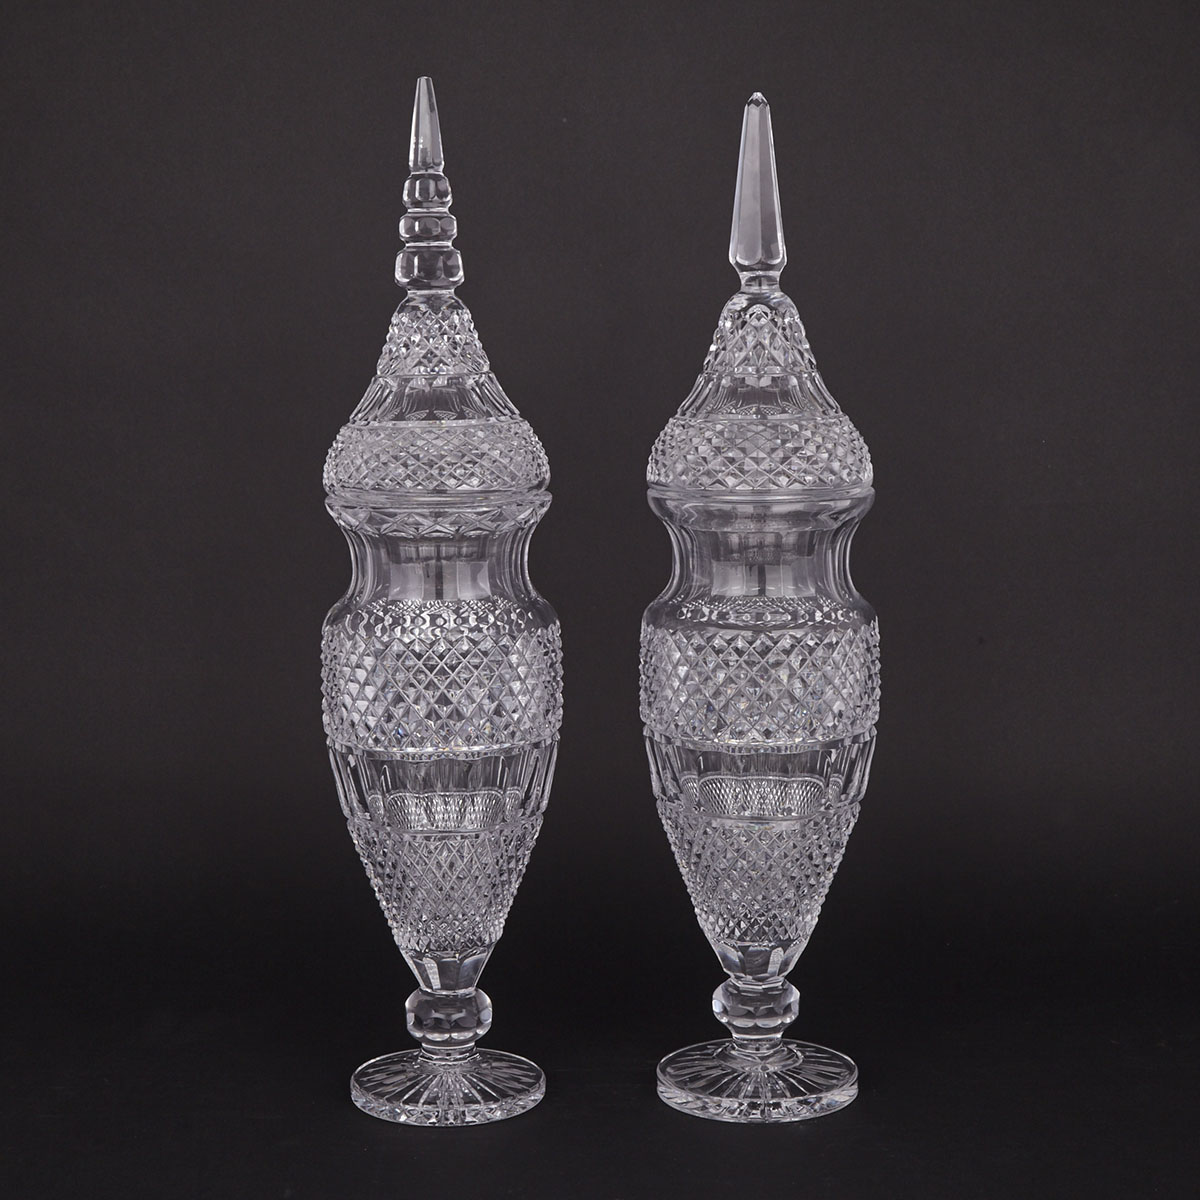 Two Bohemian Cut Glass Covered Vases, 20th century